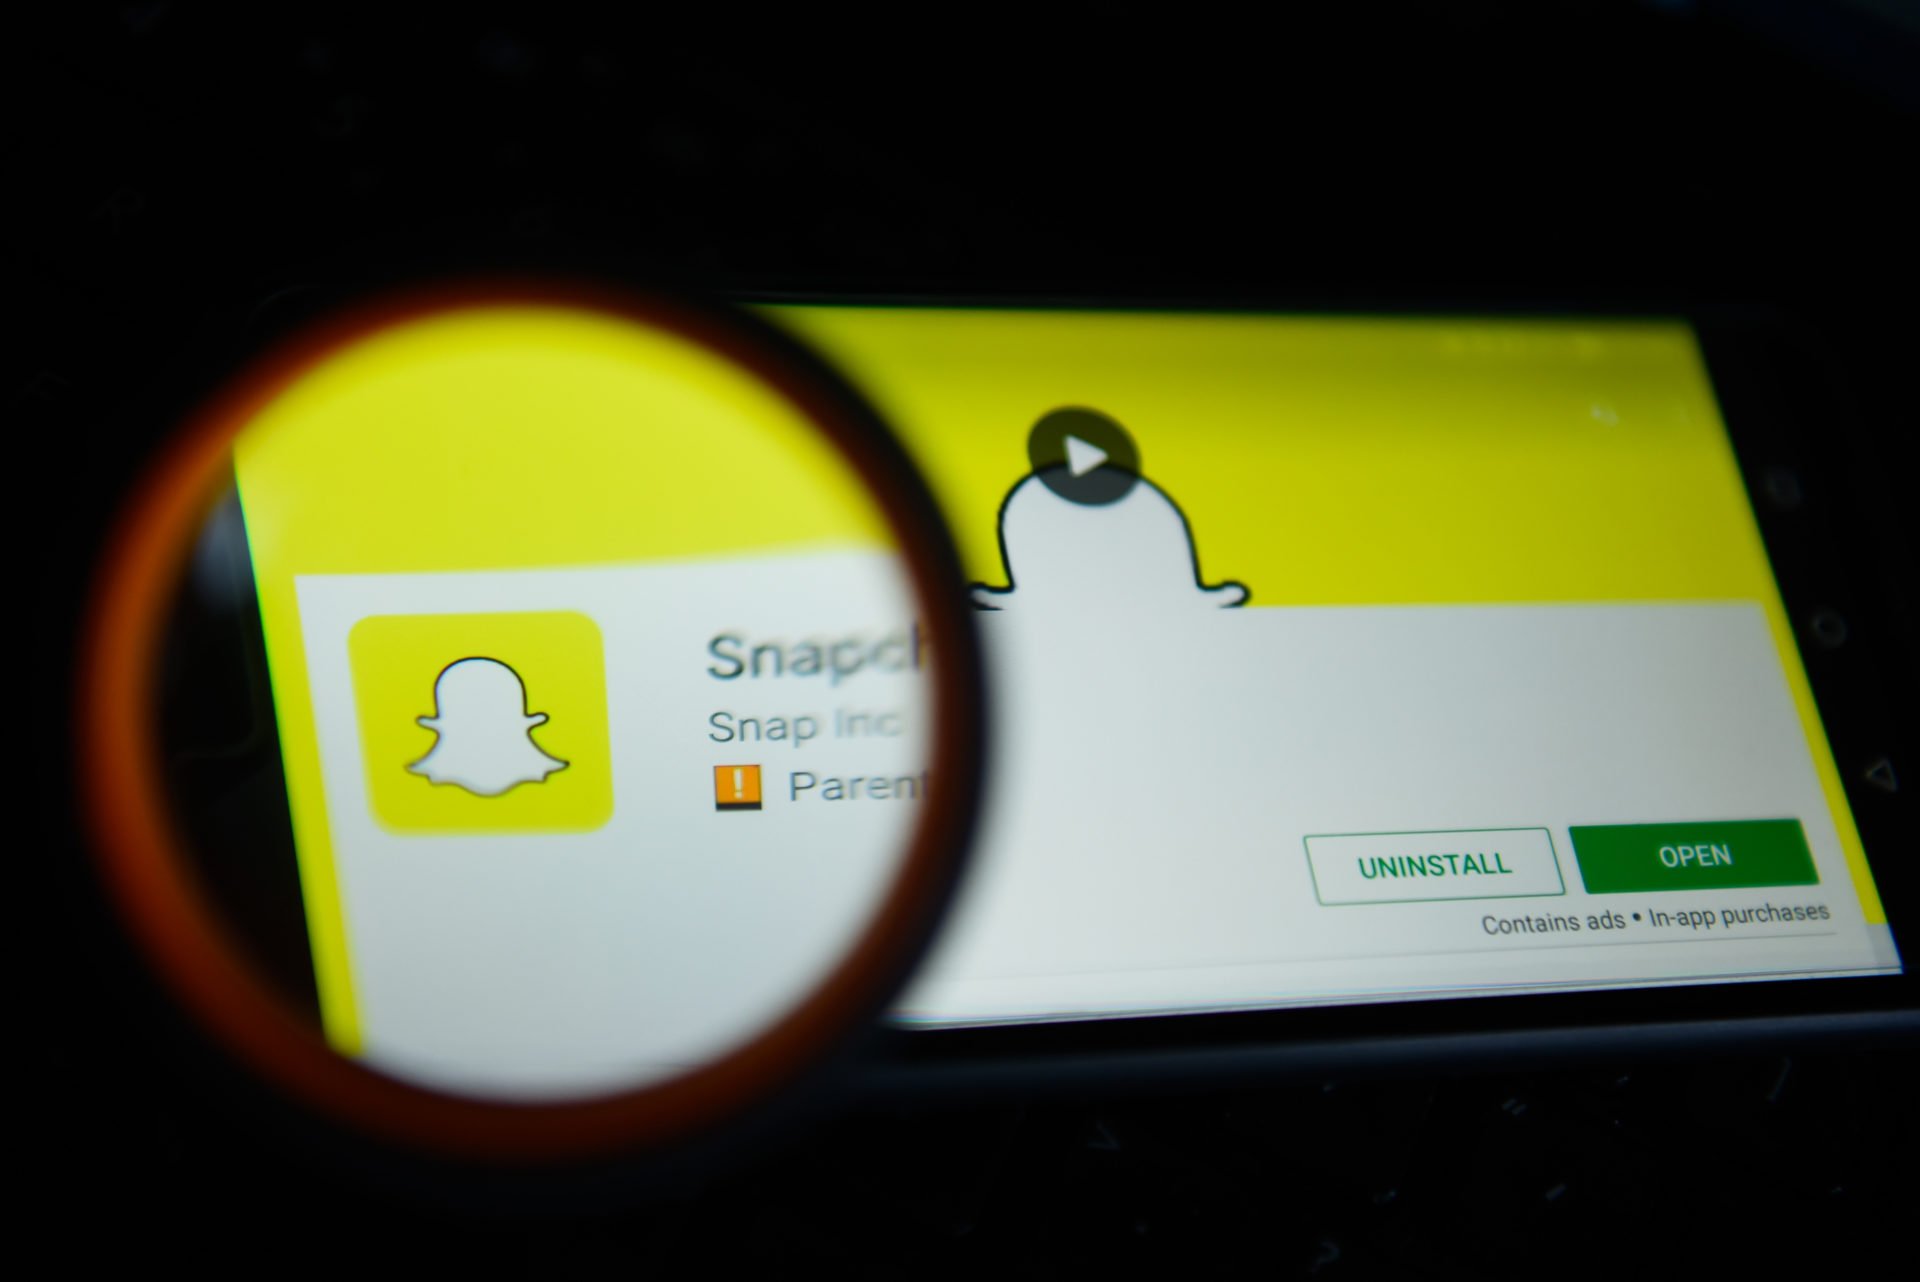 Compatibility issues - Some Android devices may not be compatible with Snapchat, preventing users from using the app altogether.
Connection issues - Users may experience difficulty connecting to Snapchat on their Android devices, preventing them from using the app properly.